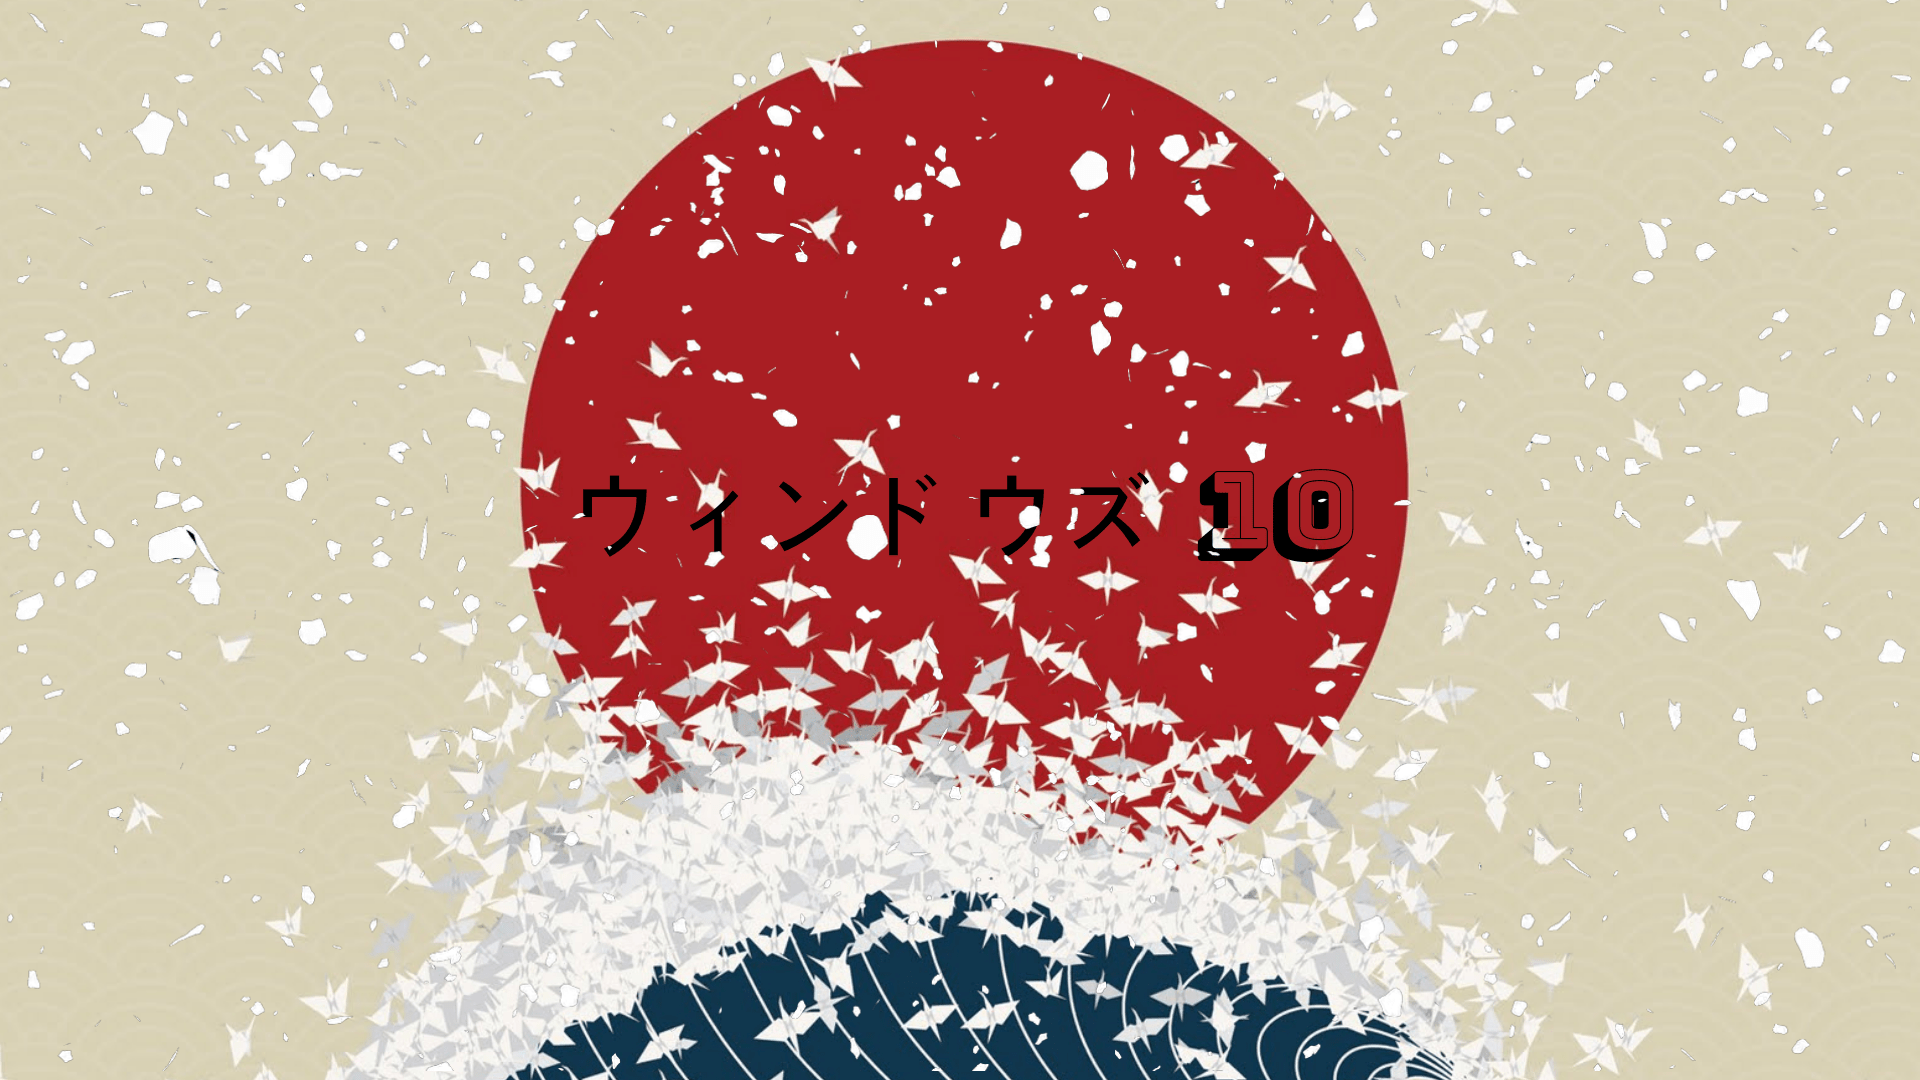 A red sun with the number 10 written in Japanese, with a wave in the foreground and cherry blossoms falling. - Windows 10